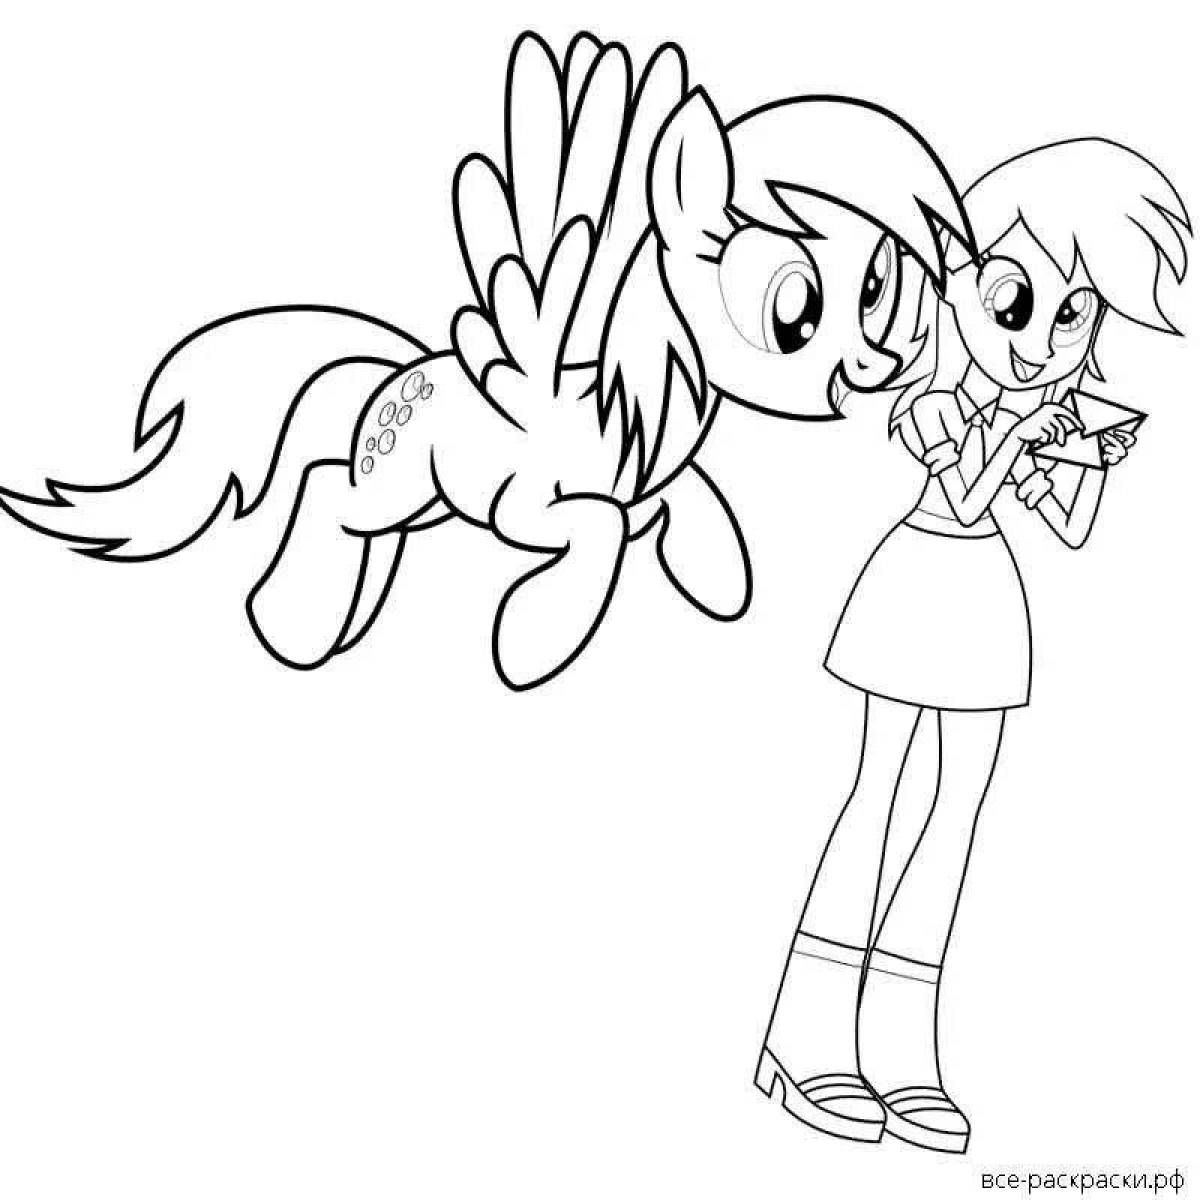 Brilliant pony play time coloring page